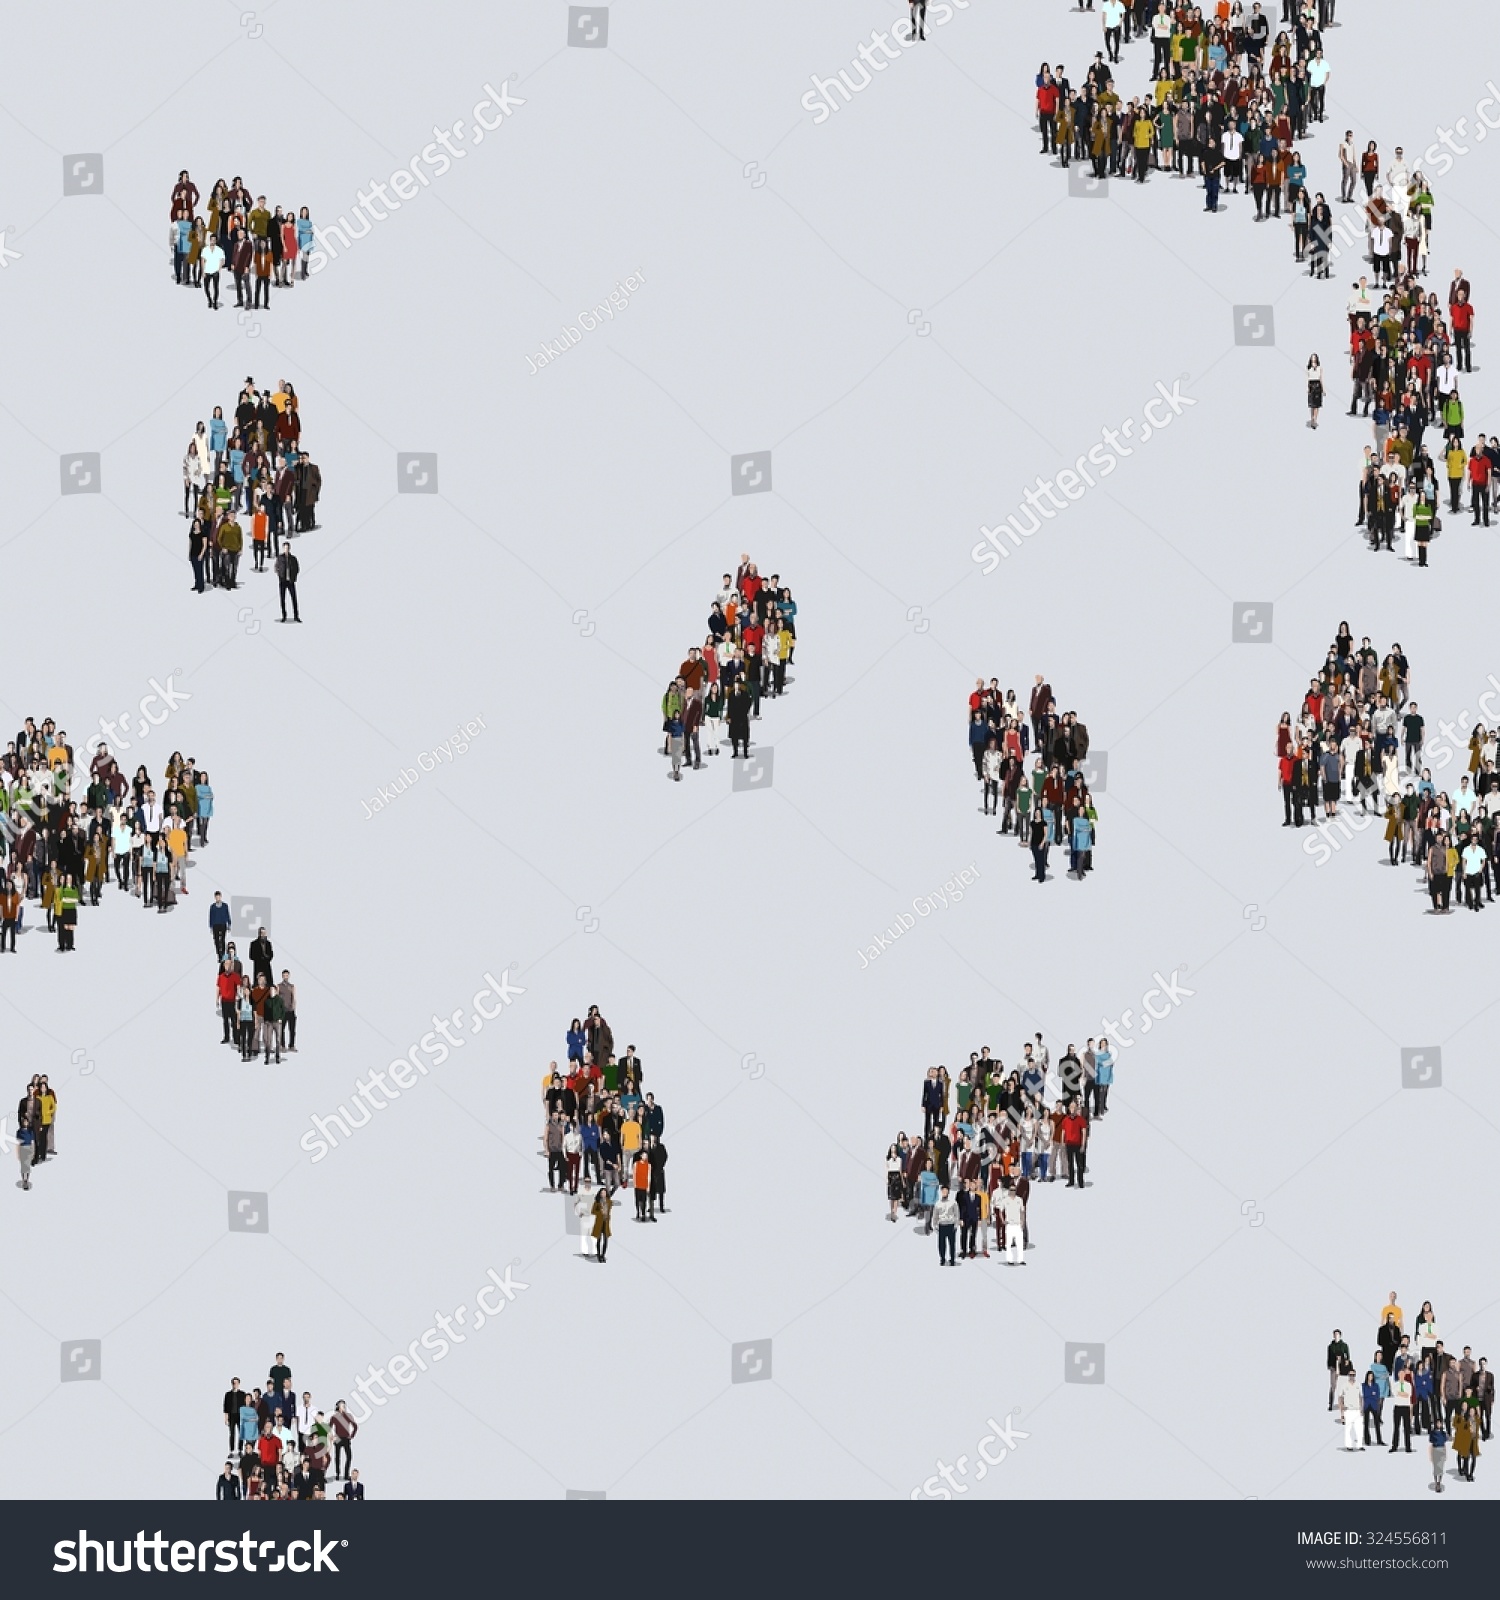 Large group of people, crowd forming various shapes across surface on grayish constant background for posters and advertisement. #324556811